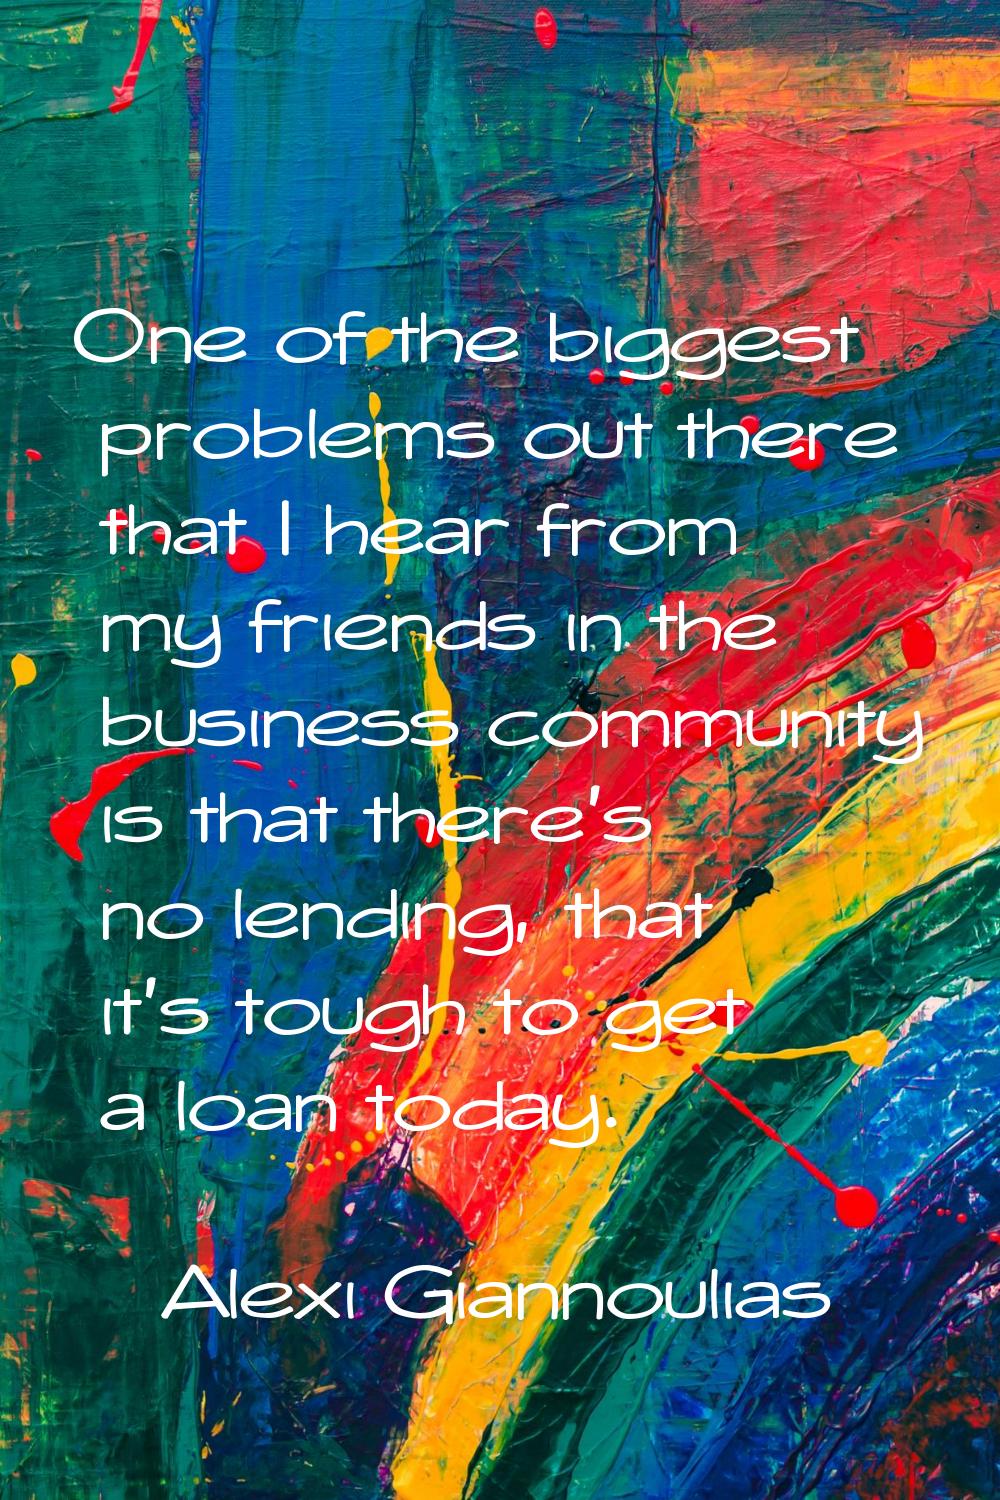 One of the biggest problems out there that I hear from my friends in the business community is that